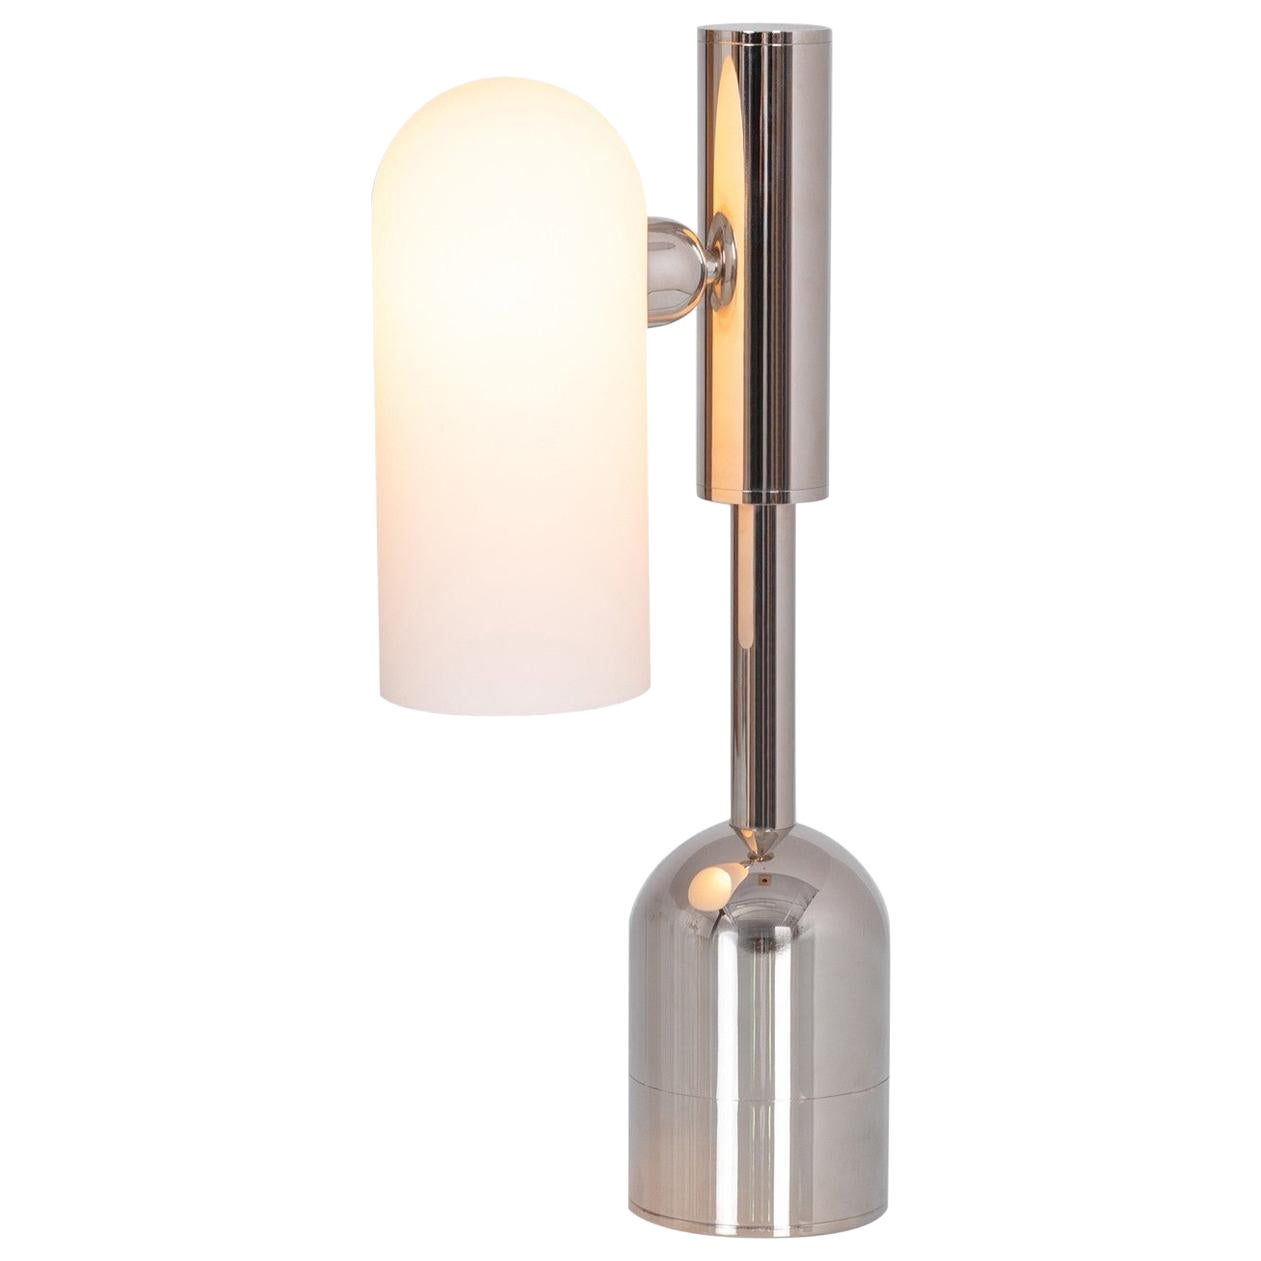 Odyssey 1 Polished Nickel Table Lamp by Schwung For Sale